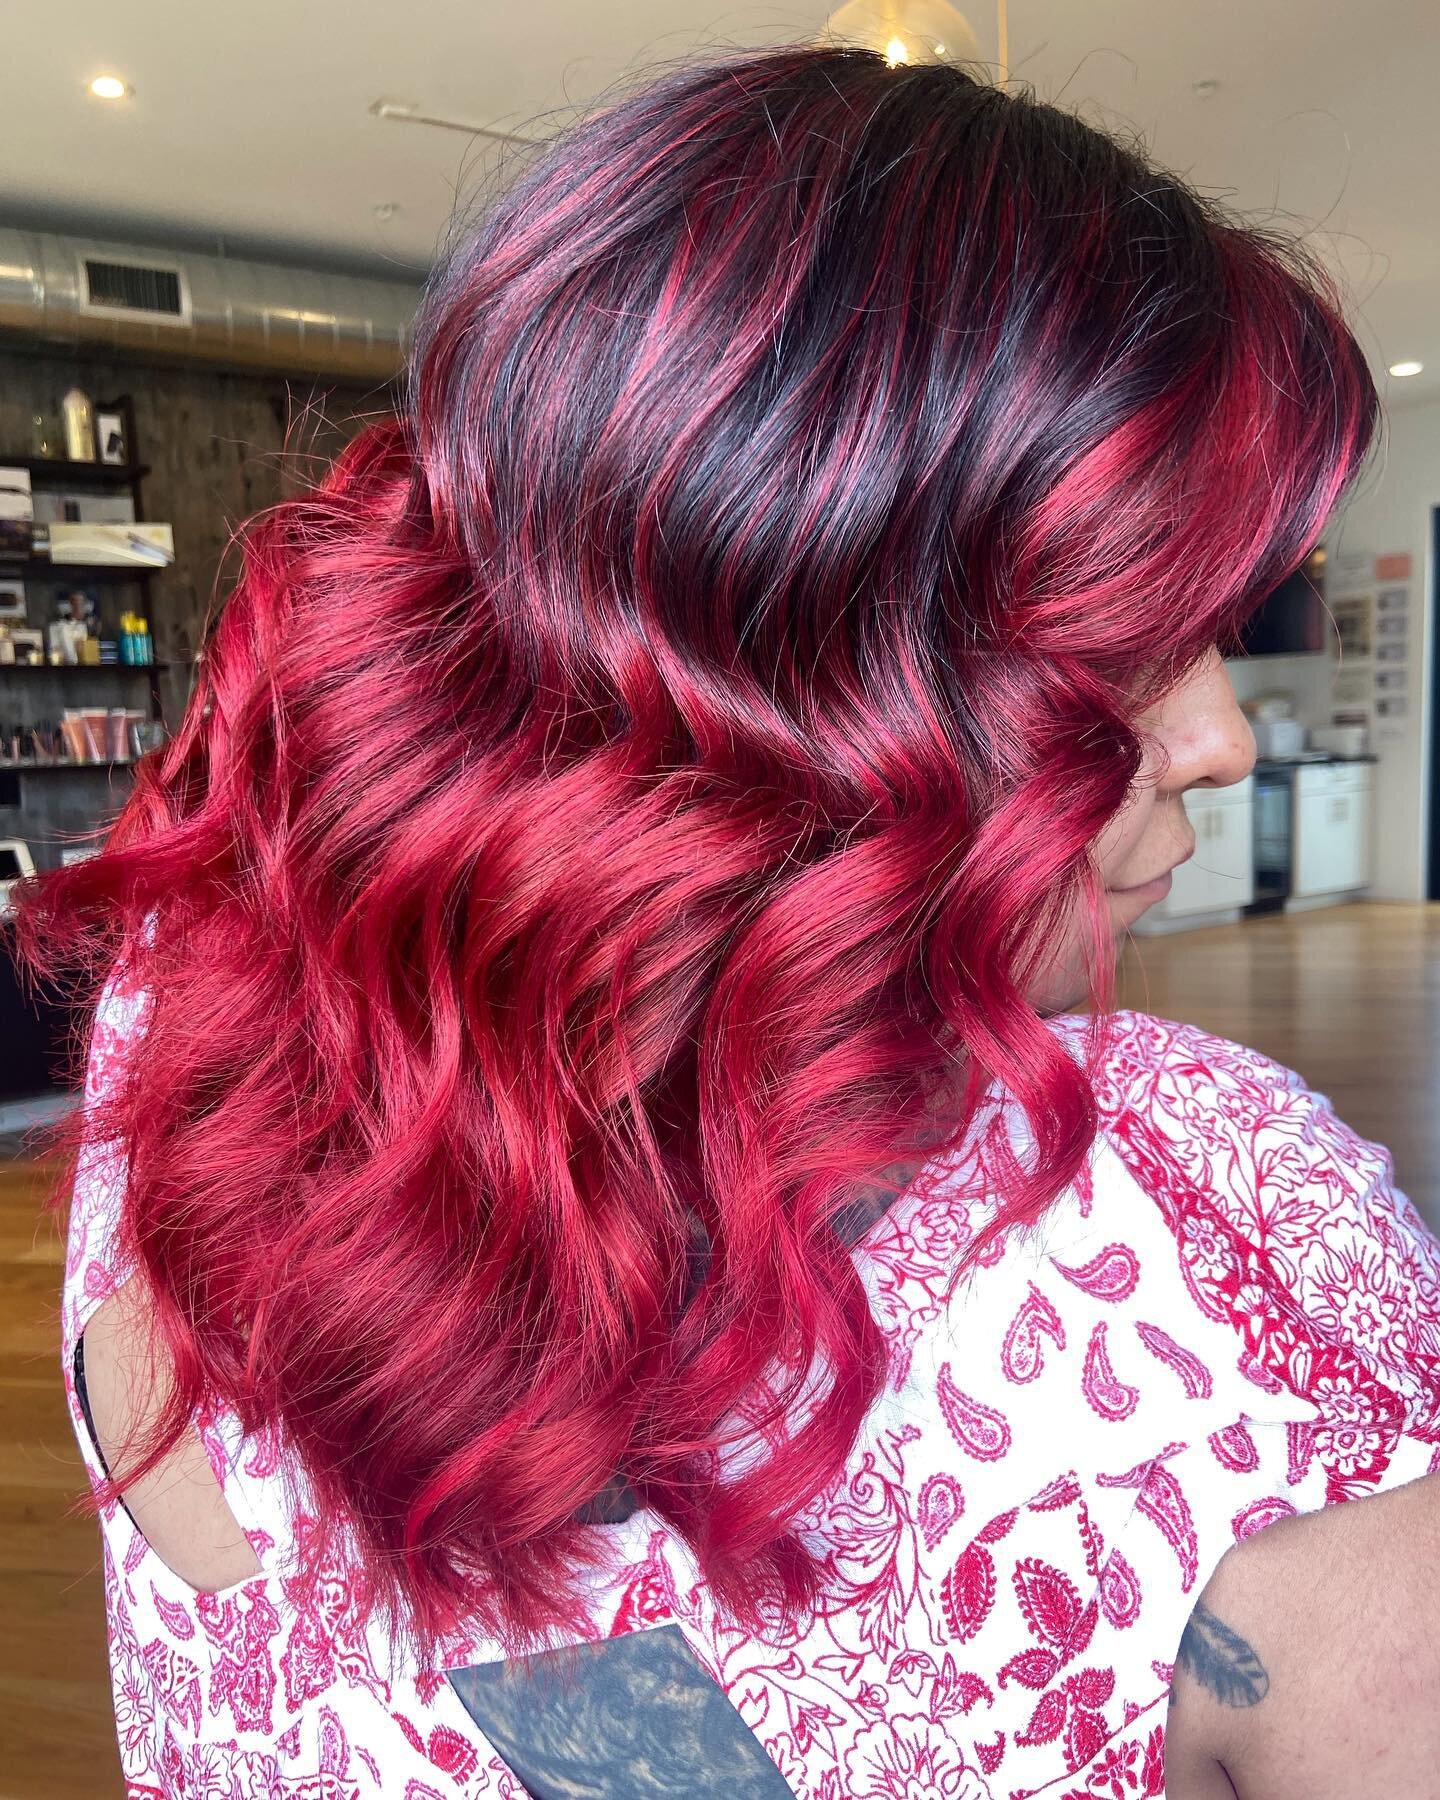 ✨Here at crown salon your color is custom to you ✨ 

Book your next appointment today! 

Color by @hairsbydana